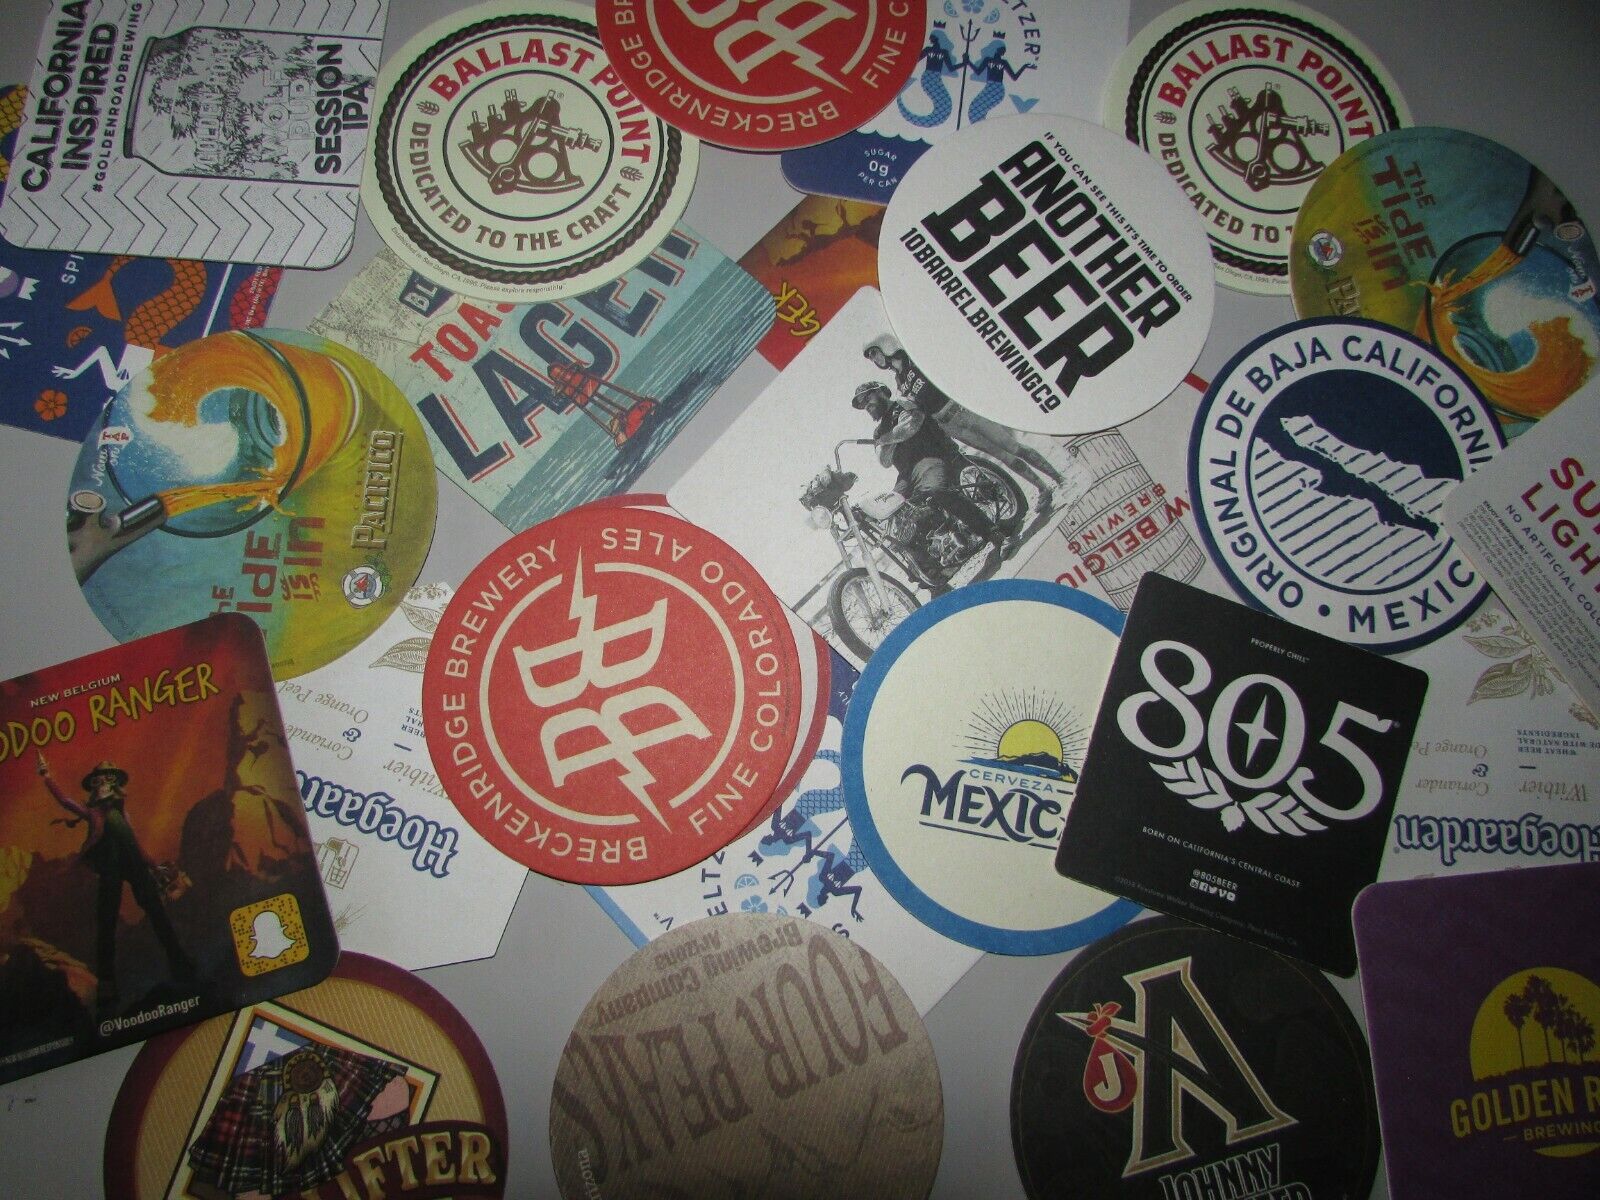 25 Beer Bar Coasters 805 Voodoo Ballast Point Elysian Pacifico Blue Point lot a Budweiser